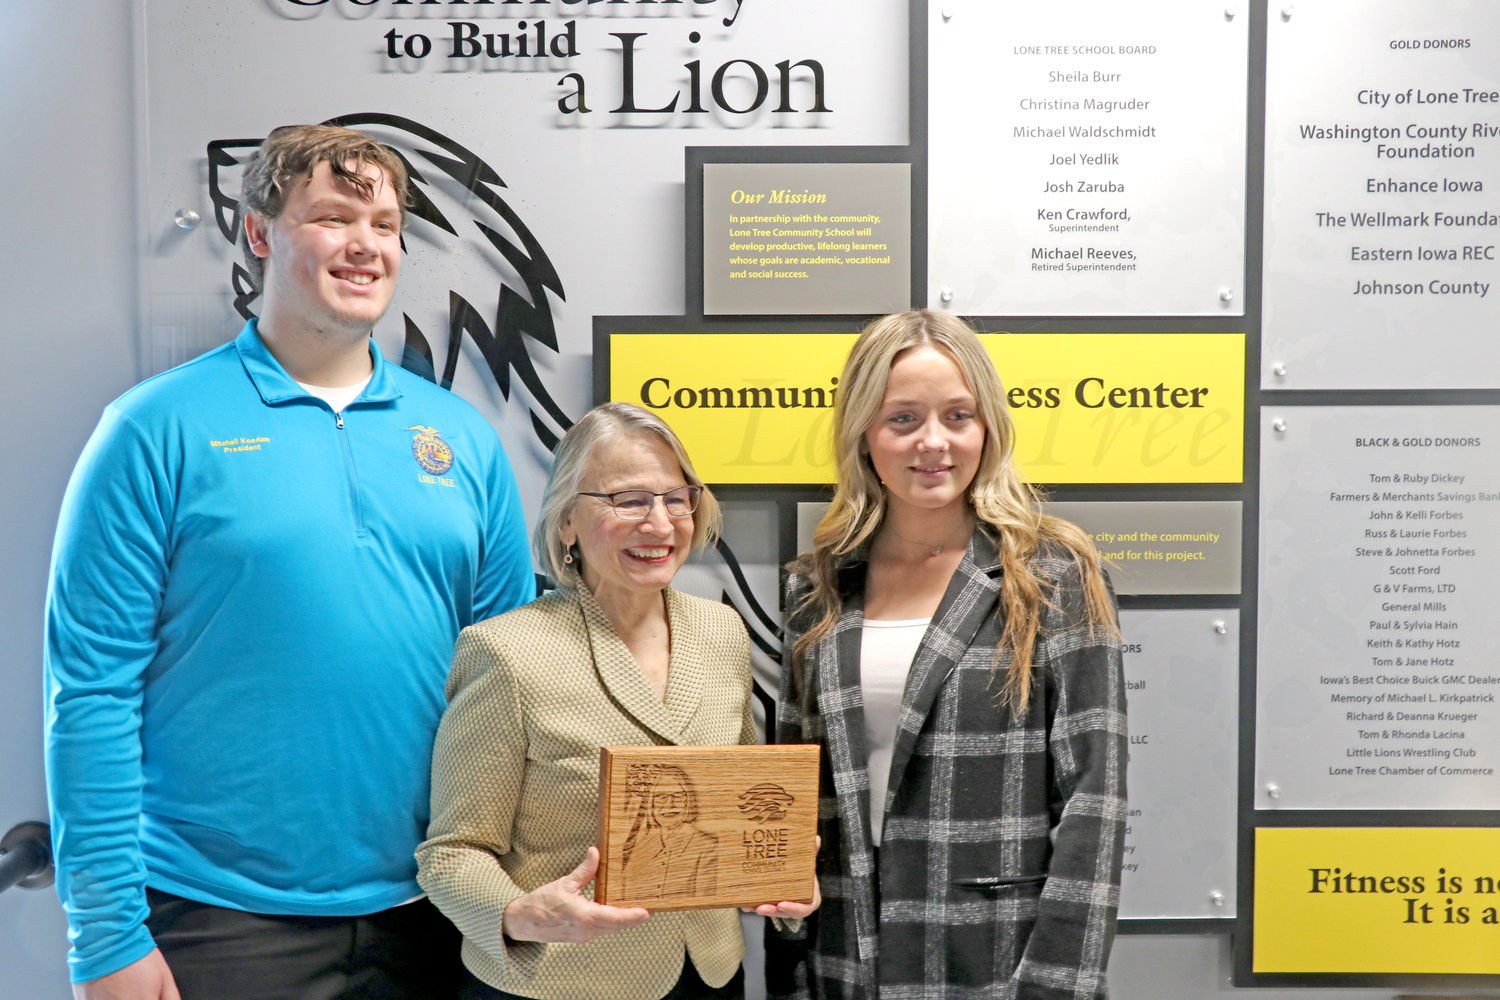 Students Mitchell Koedam and Lila Bell lead Rep. Miller-Meeks on a school tour.  At their last stop at the Community Wellness Center, they presented her with a plaque laser-engraved with her likeness and the school’s logo.